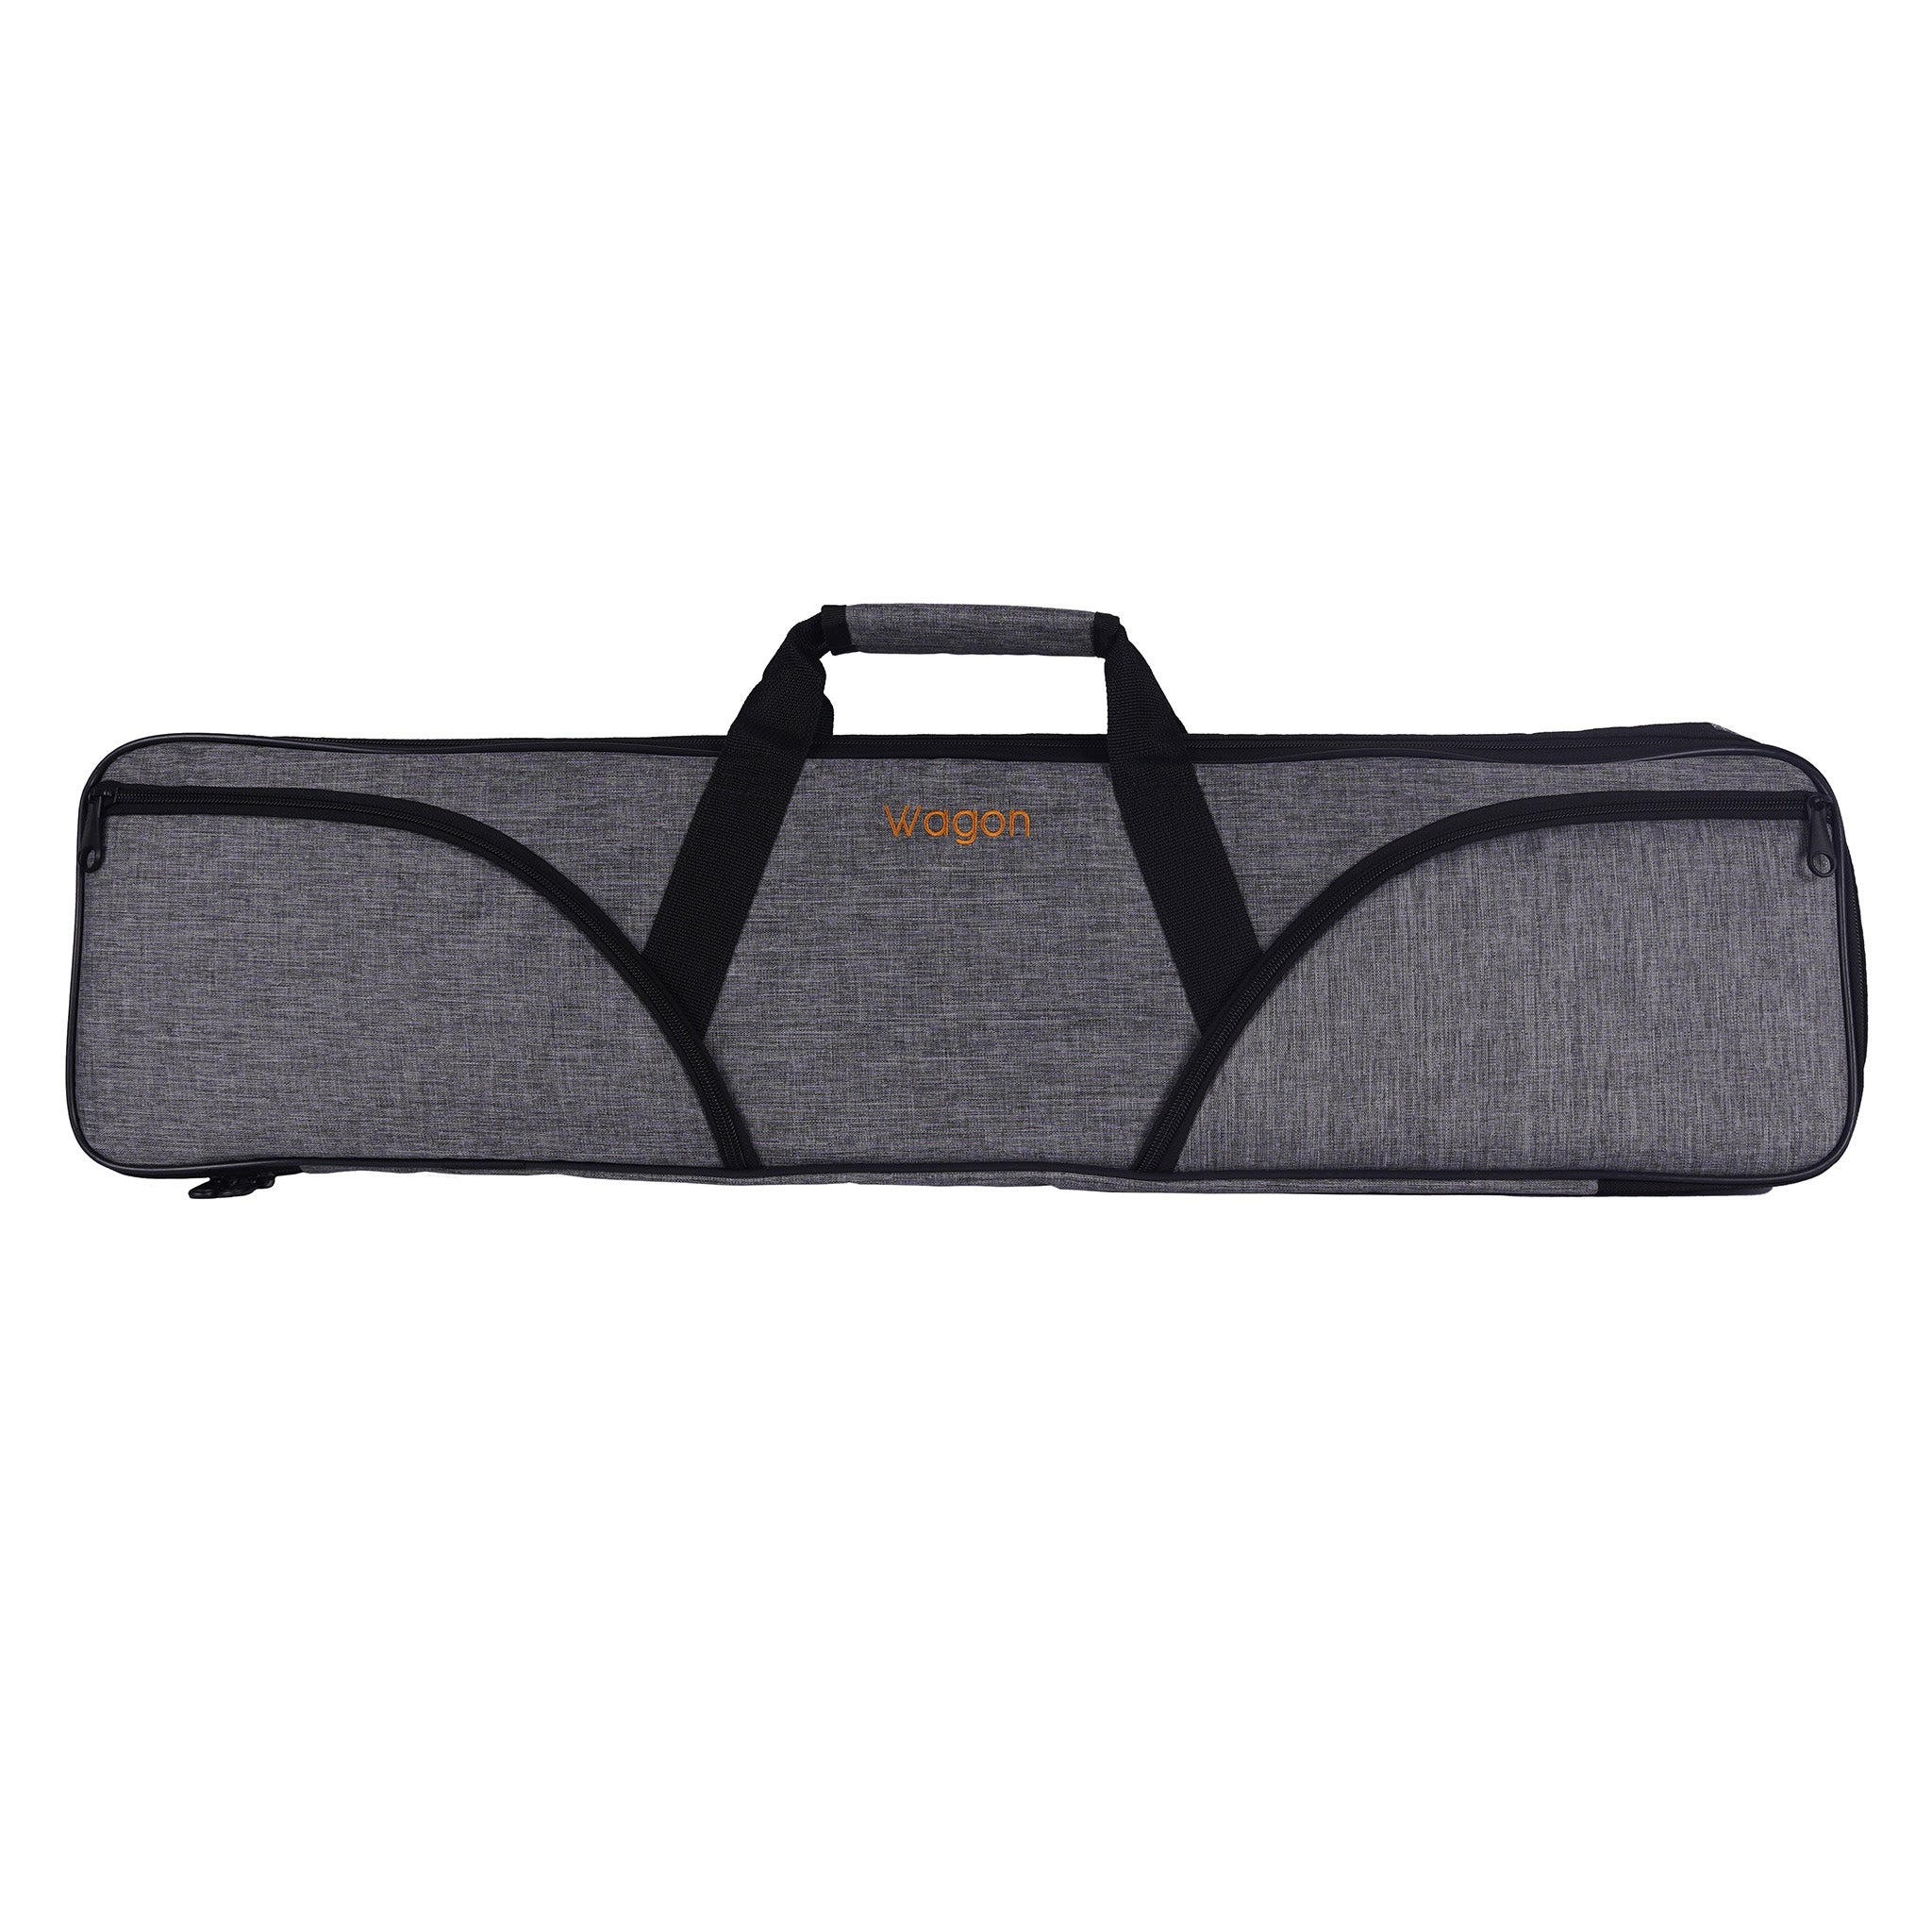 Ford Mondeo wagon 2014-present Car-Bags travel bags | Cabrio Supply